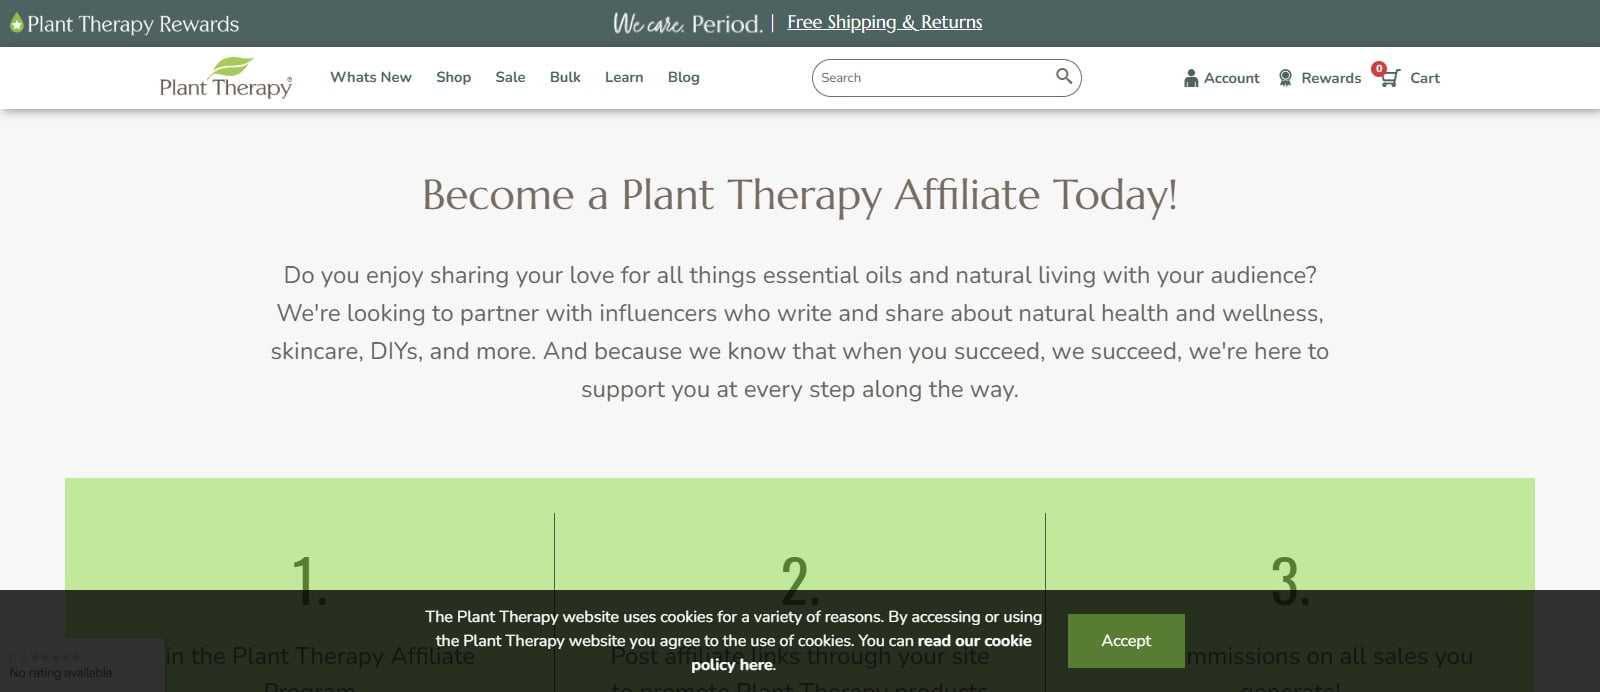 Plant Therapy Affiliates Program Review: 7.5% Commission on Each Sale